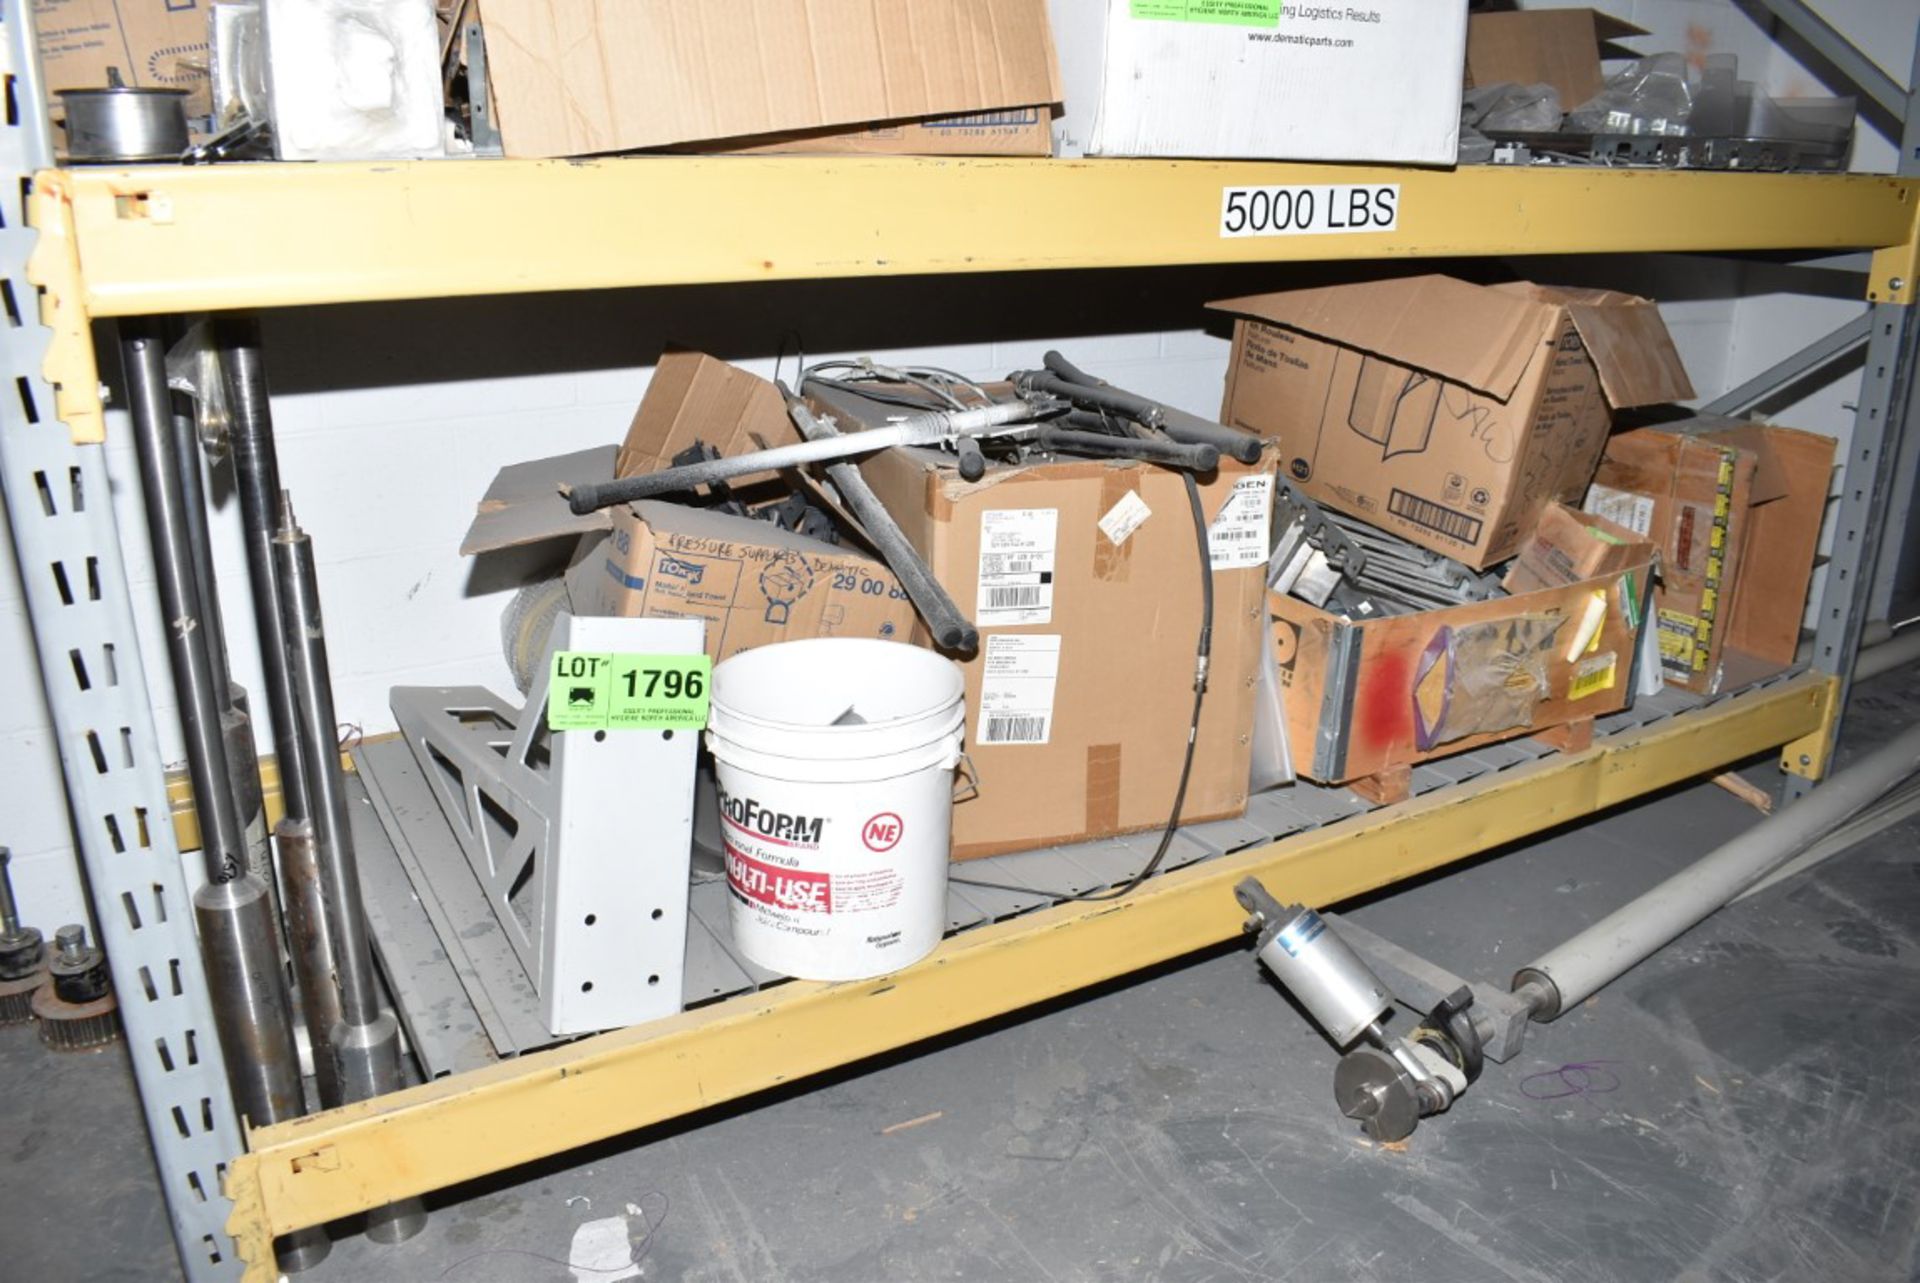 LOT/ CONTENTS OF SHELF - INCLUDING BRACKETS, HARDWARE, SPARE PARTS [RIGGING FEE FOR LOT #1796 - $